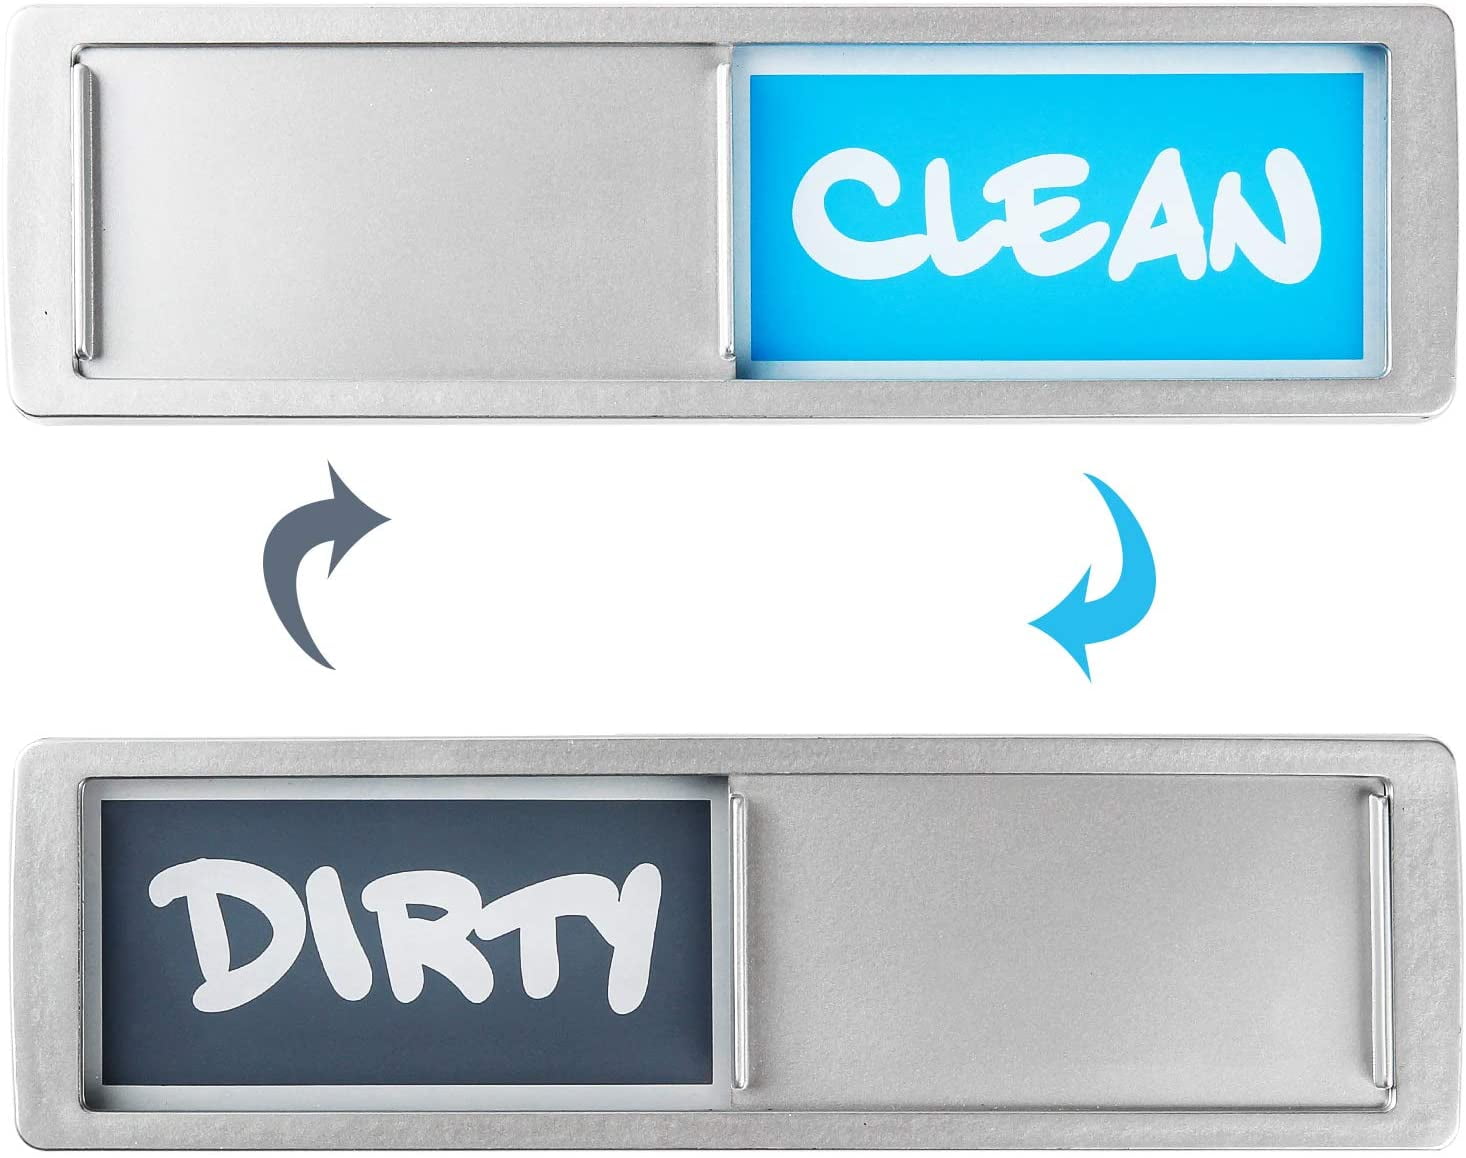 Clean Dirty Magnets for Dishwasher Indicator,Both Magnetic and Sticky Dishwasher Sign,Slide to Show Dishes Clean or Dirty/Black Refrigerator Magnet MOONOON Dirty Clean Dishwasher Magnet 2 Pack 